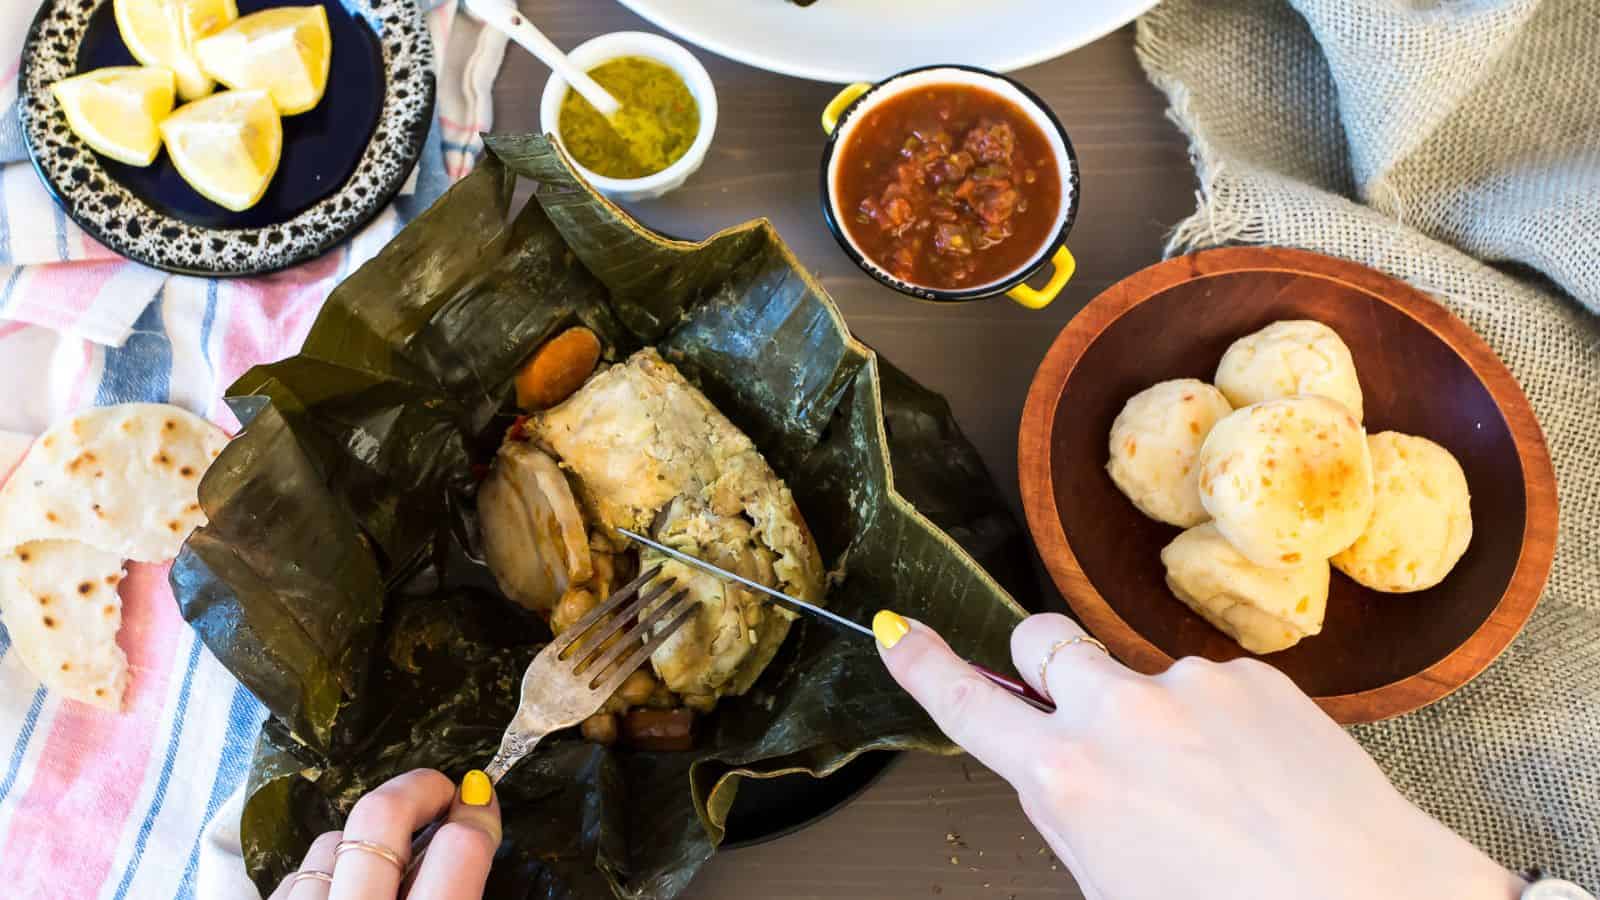 A person is unwrapping a traditional dish cooked in banana leaves, featuring Grandma's Chicken Recipes, with side dishes and condiments placed around on a table.